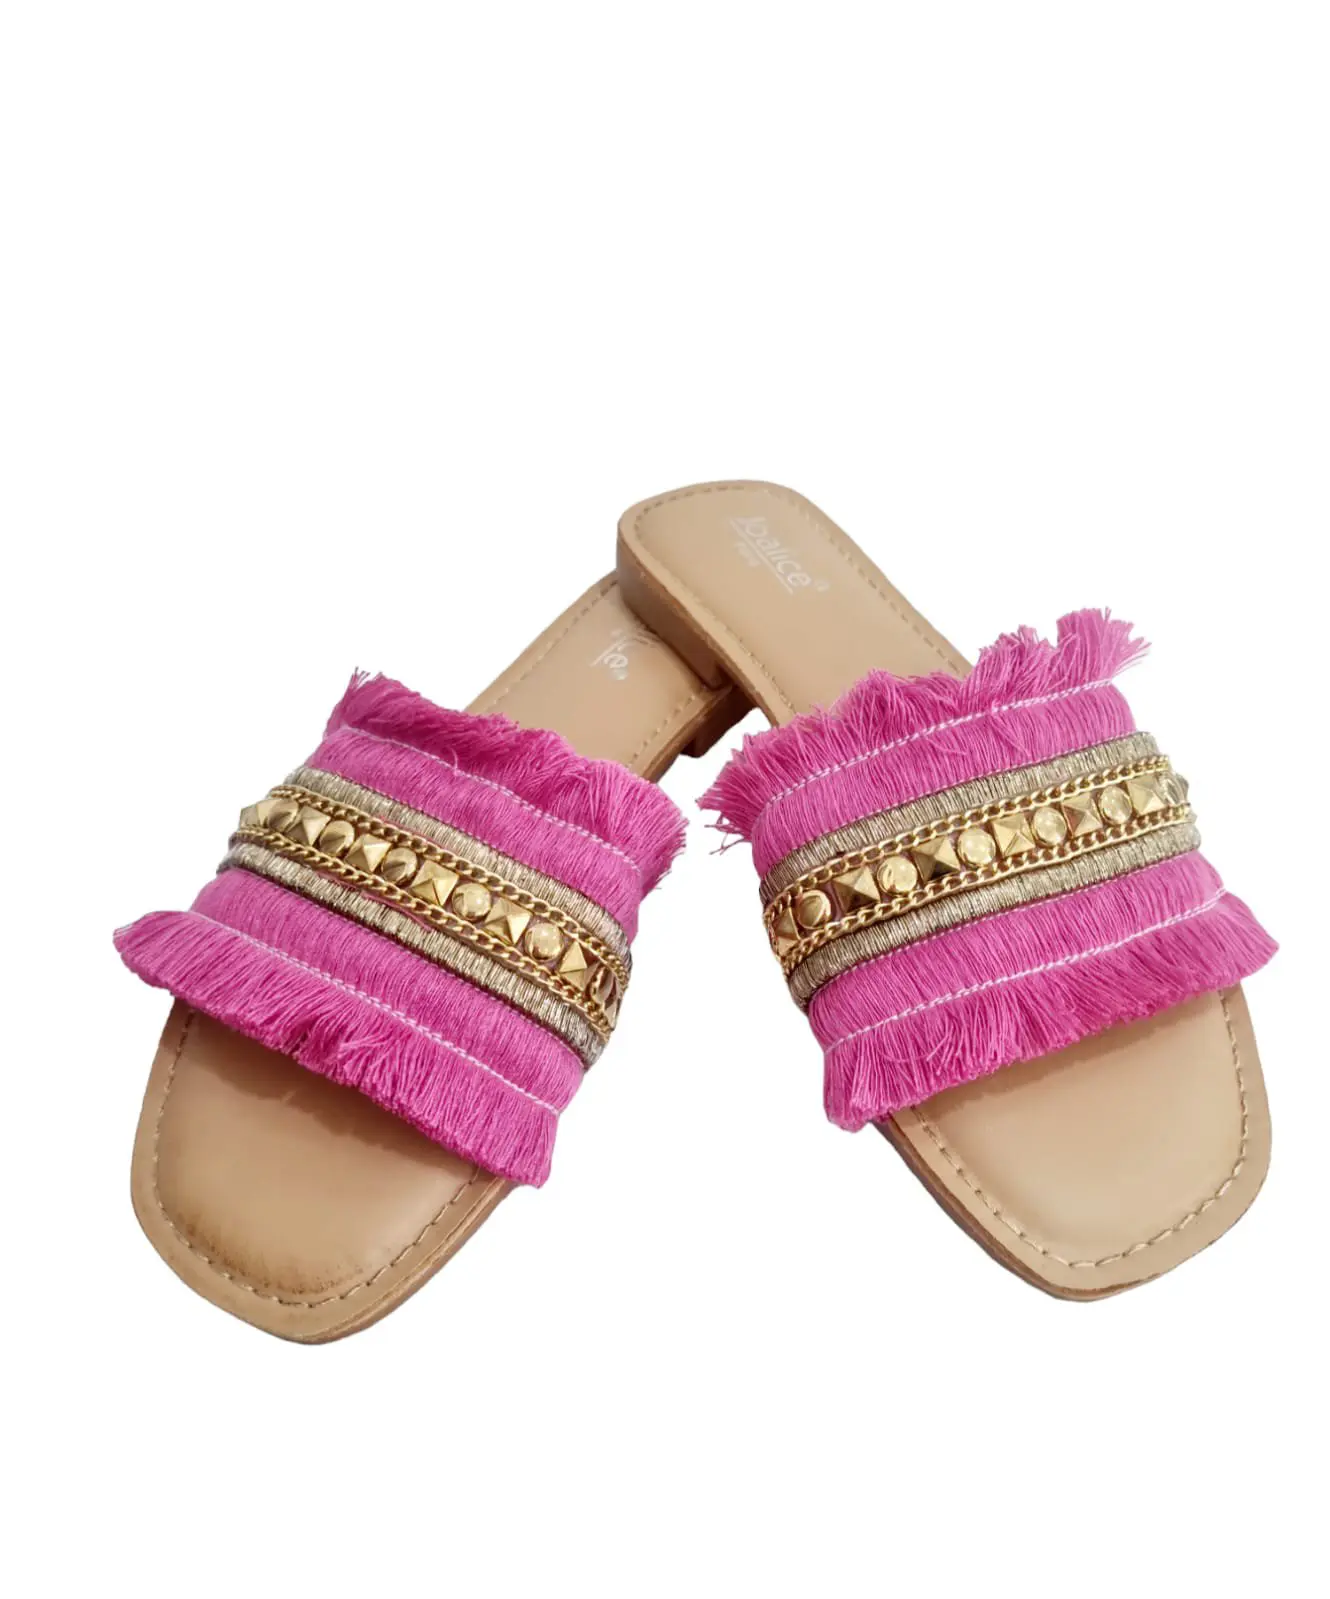 Slippers with fringes 1.5cm rise, non-slip sole. Fuchsia and gold colour